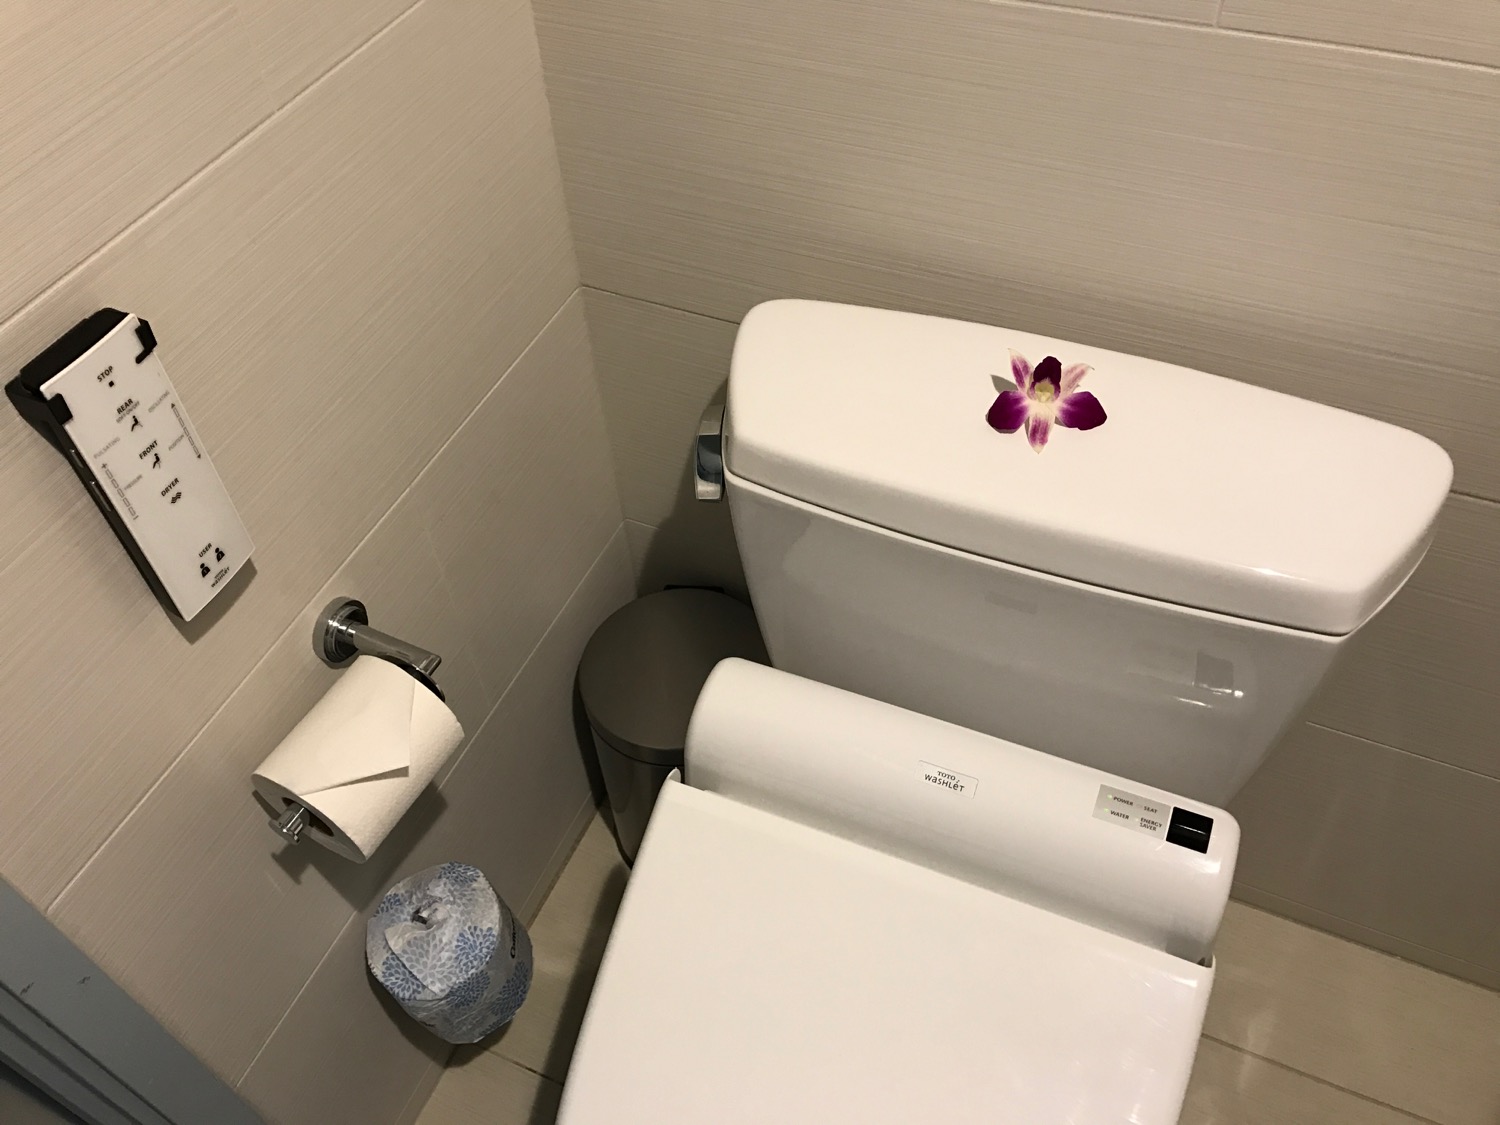 a flower on the tank of a toilet